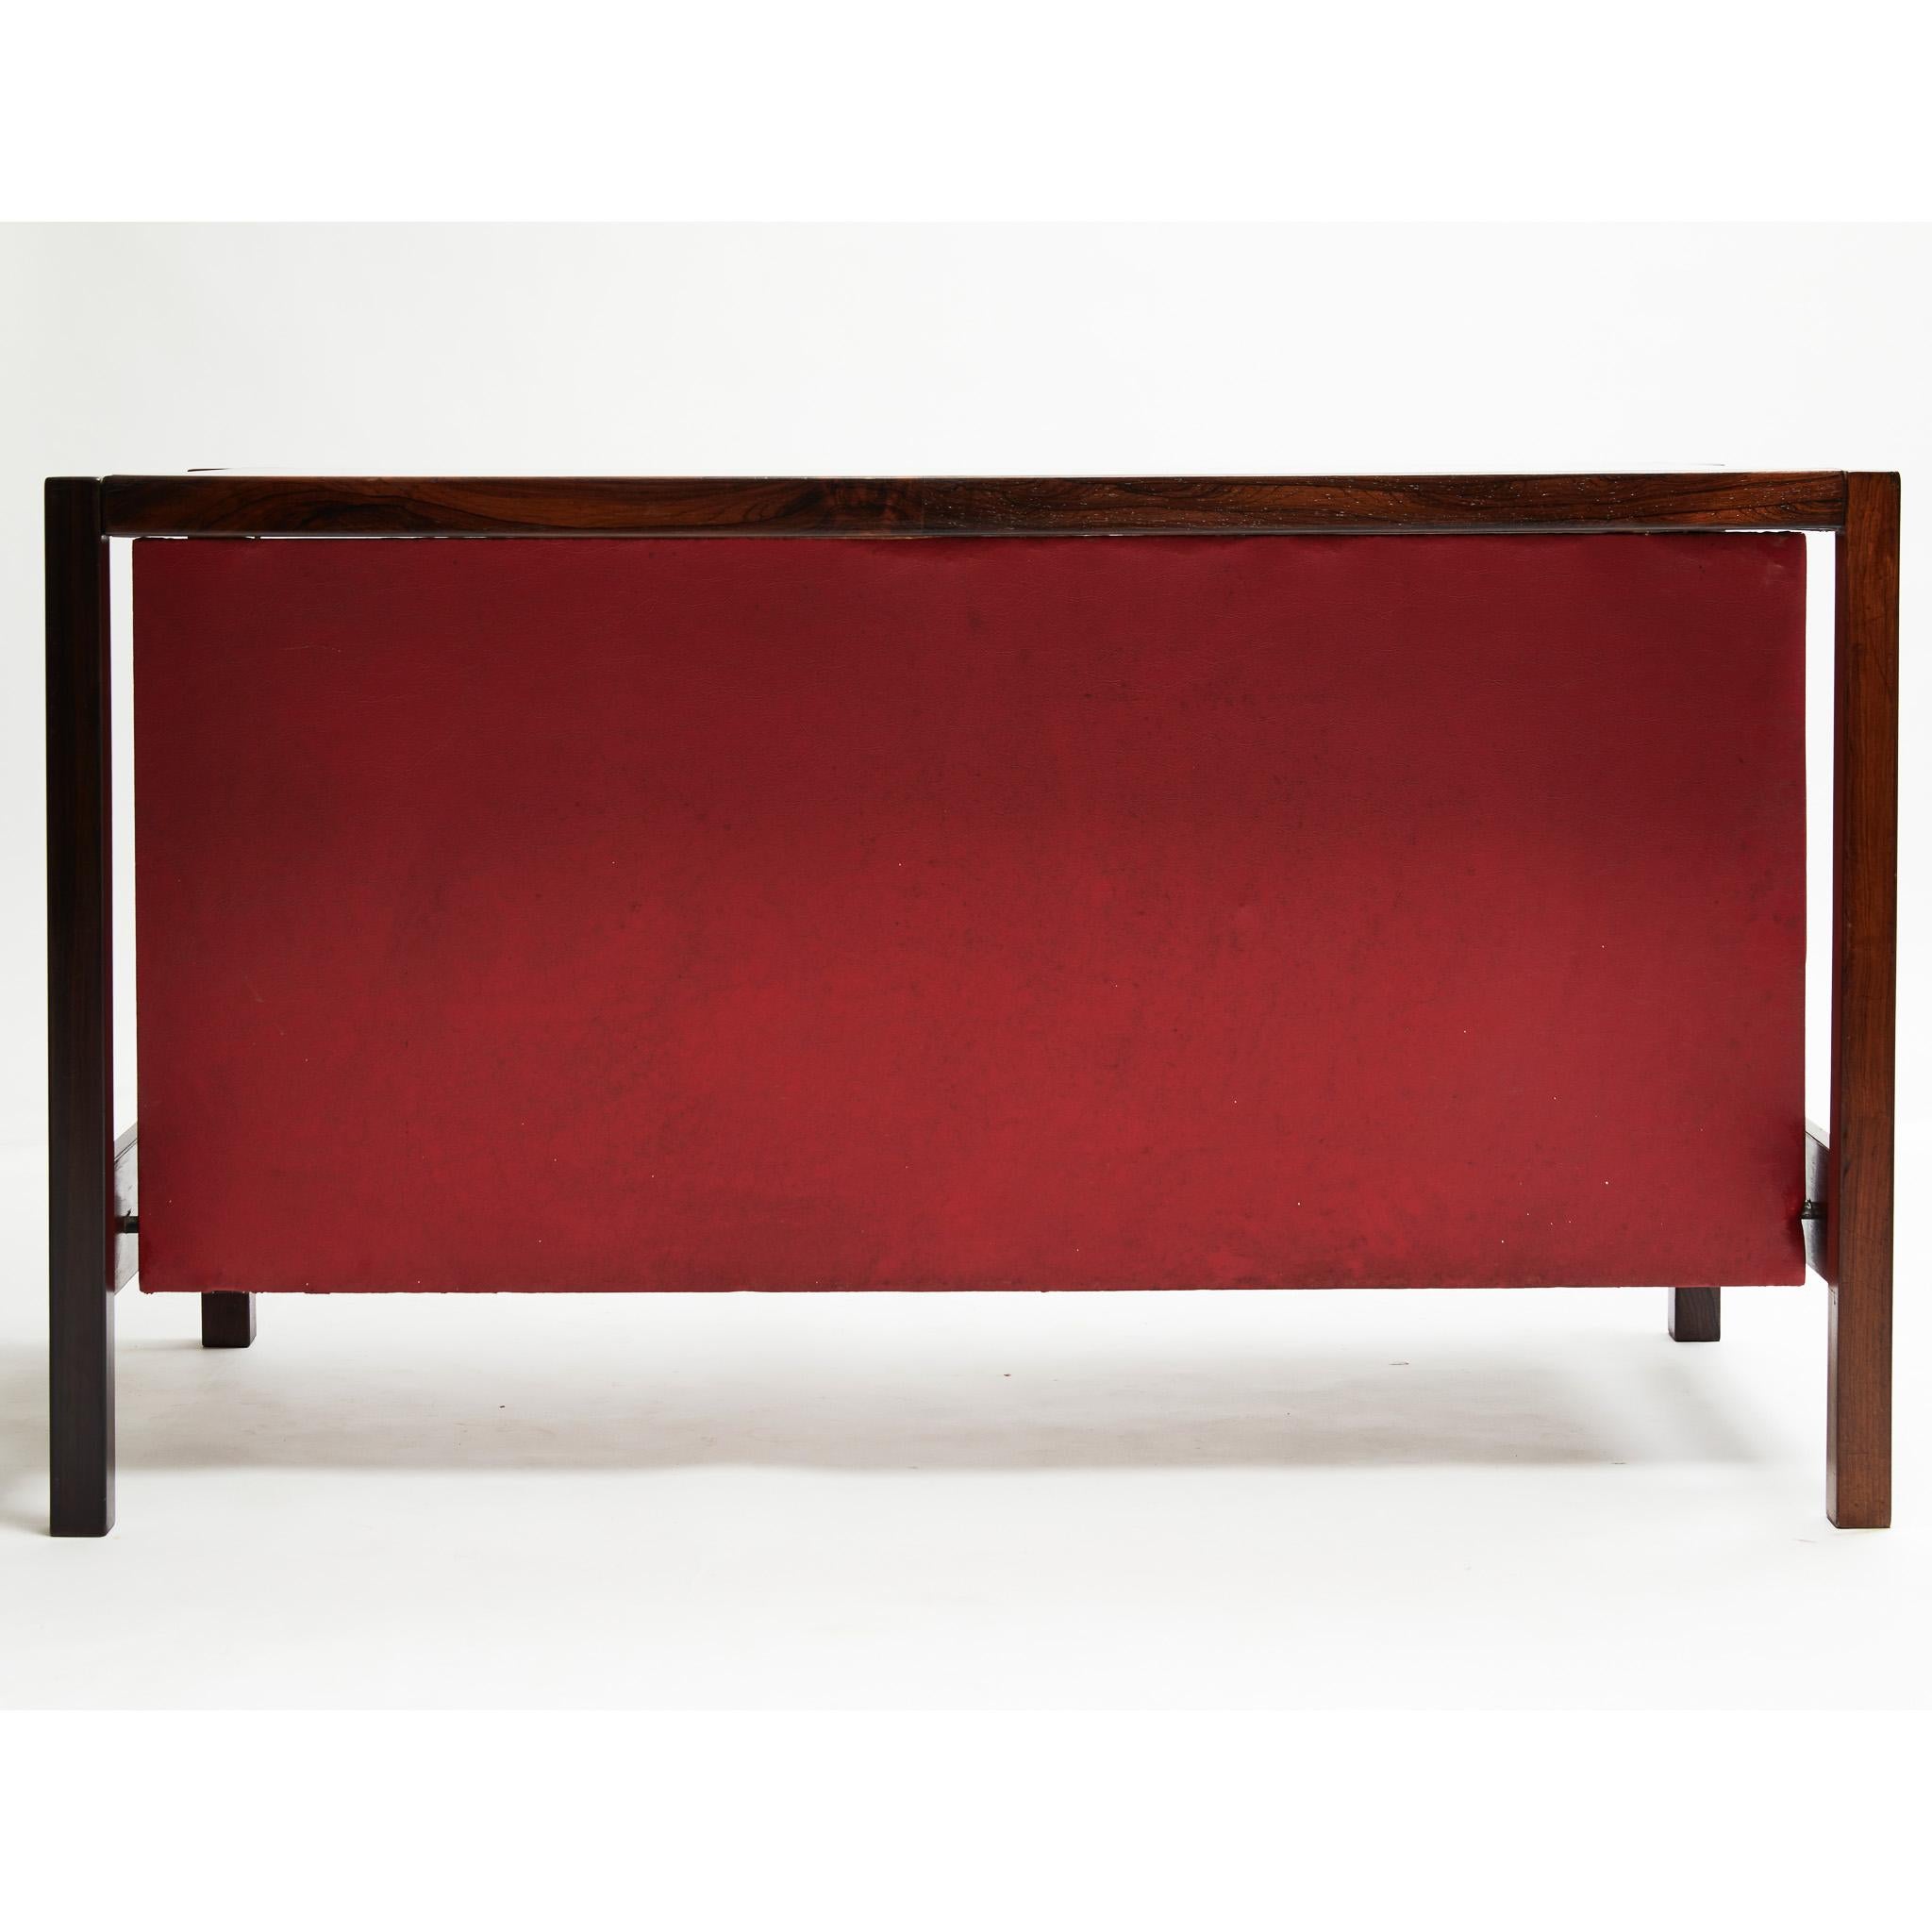 Mid-CenturyModern Desk in Hardwood by Jorge Zalszupin for L’atelier, c. 1960s In Good Condition For Sale In New York, NY